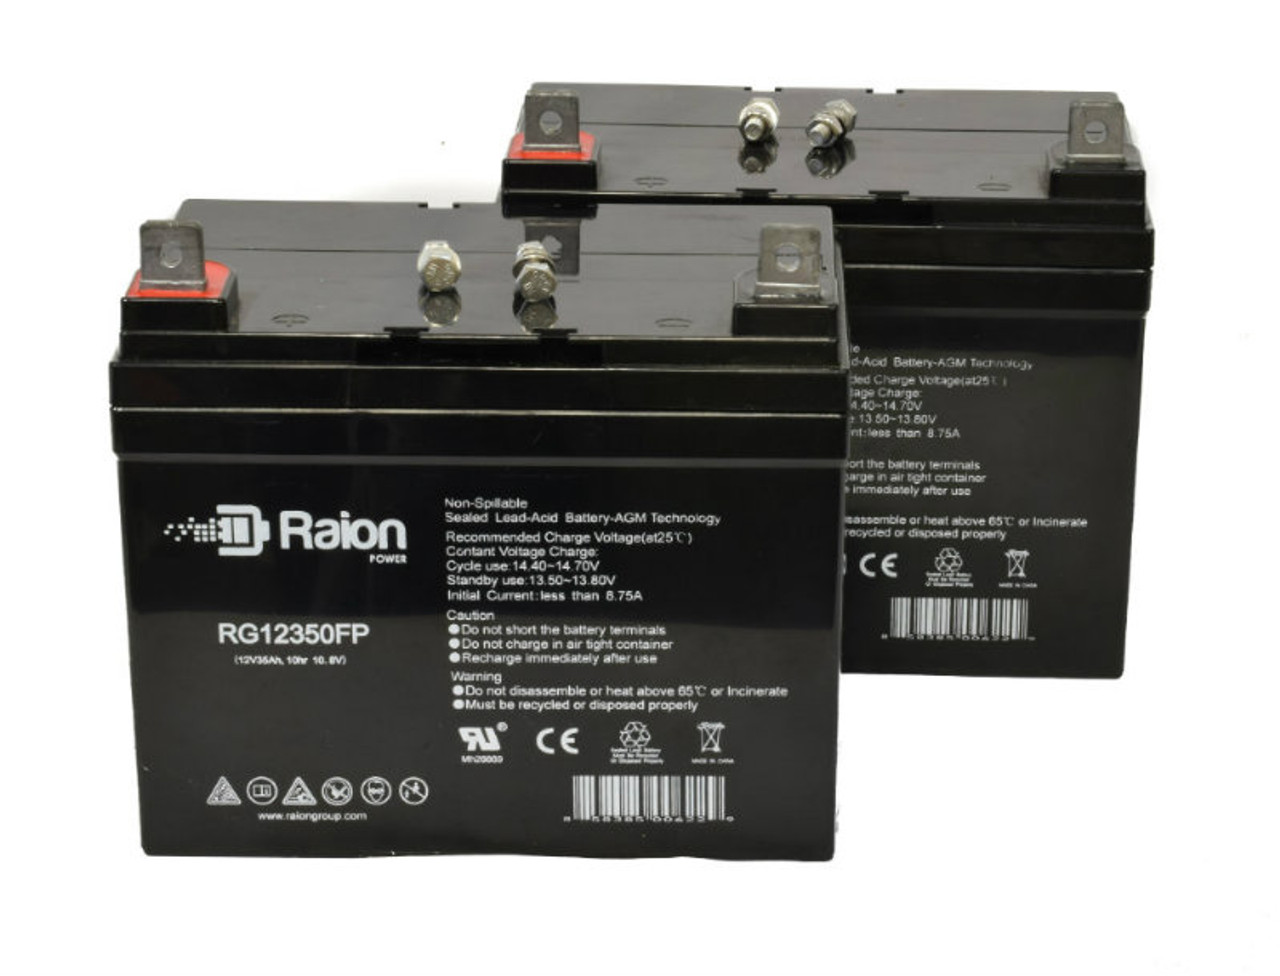 Raion Power Replacement 12V 35Ah Lawn Mower Battery for Dixon 5423 - 2 Pack